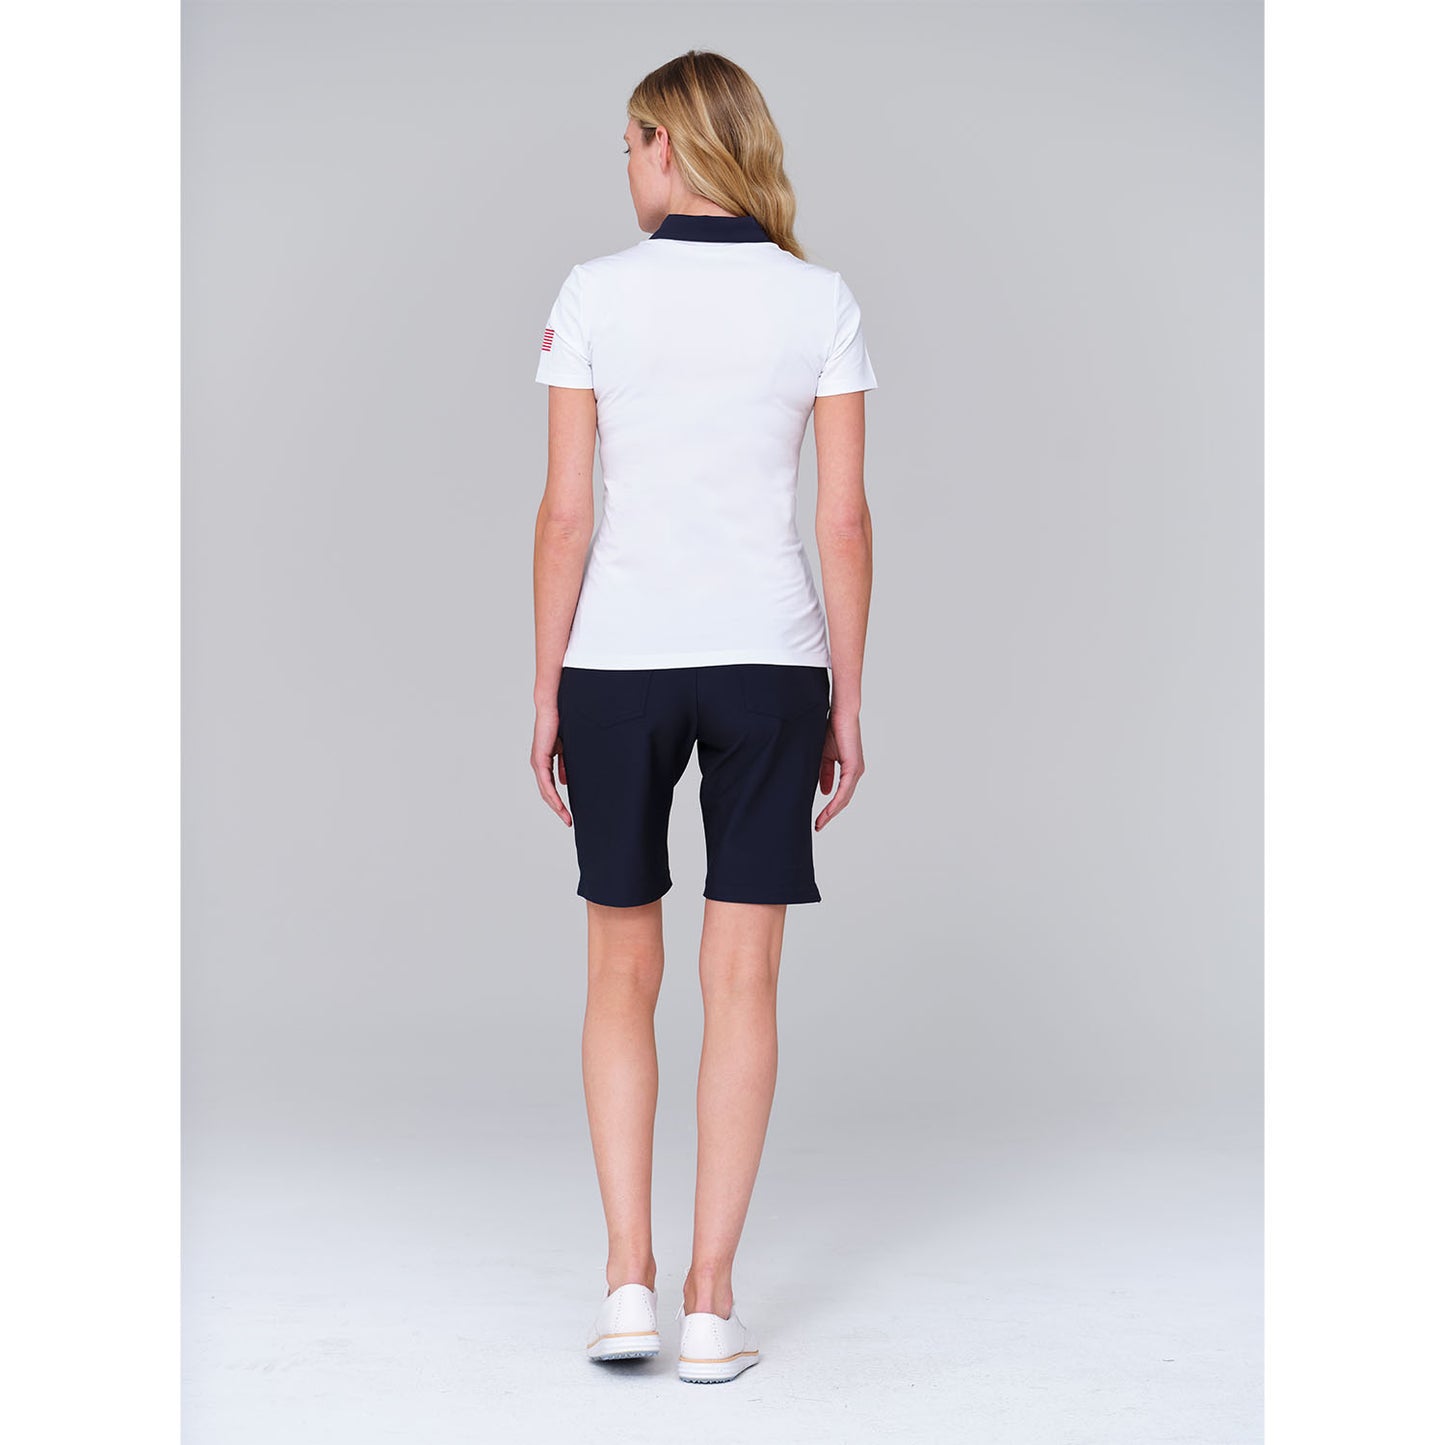 Dunning 2023 LPGA Official Solheim Cup Team Uniform Women's Short Sleeve Performance Polo in White - Lifestyle Back View